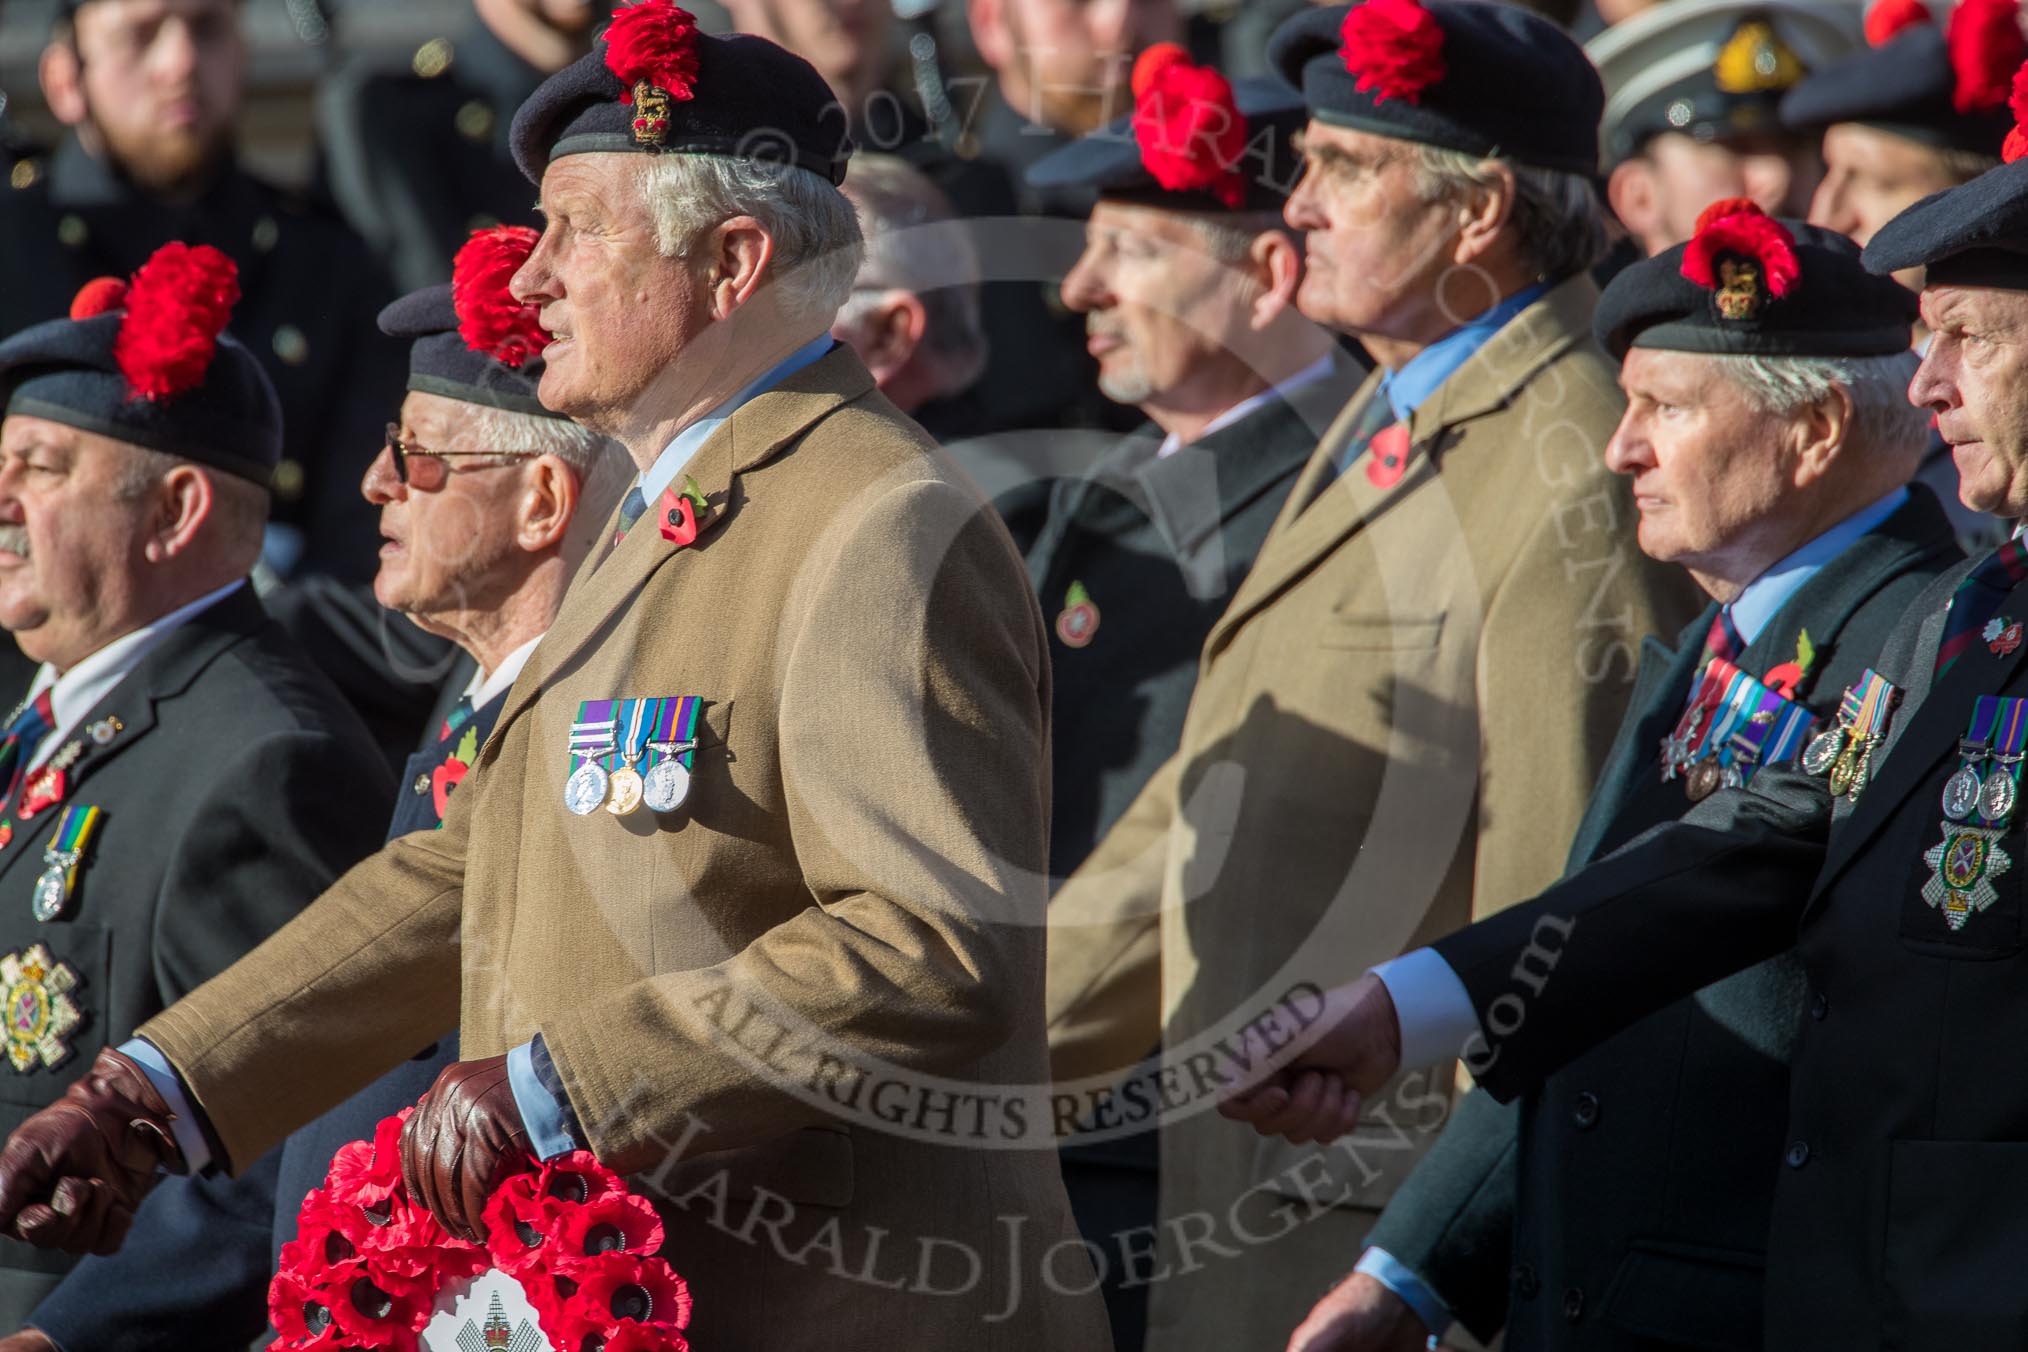 The Black Watch Association - London Branch (Group A10, 72 members) during the Royal British Legion March Past on Remembrance Sunday at the Cenotaph, Whitehall, Westminster, London, 11 November 2018, 11:57.